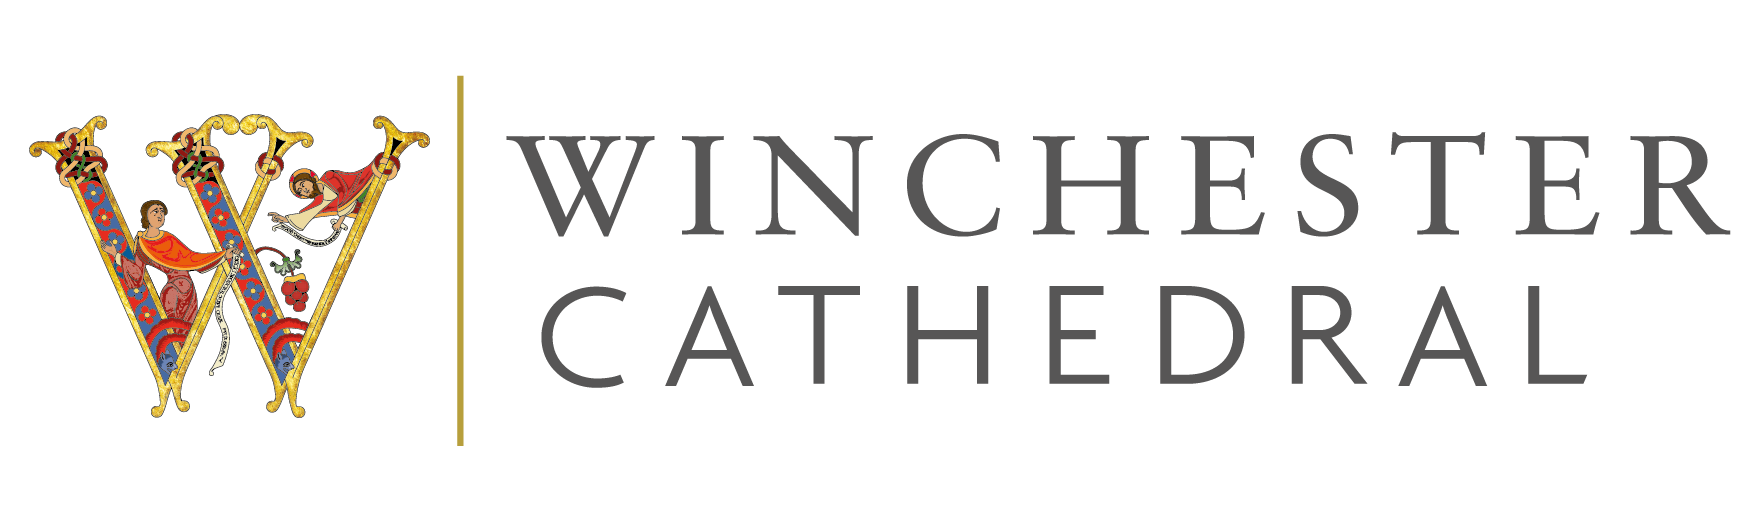 The logo for Winchester Cathedral